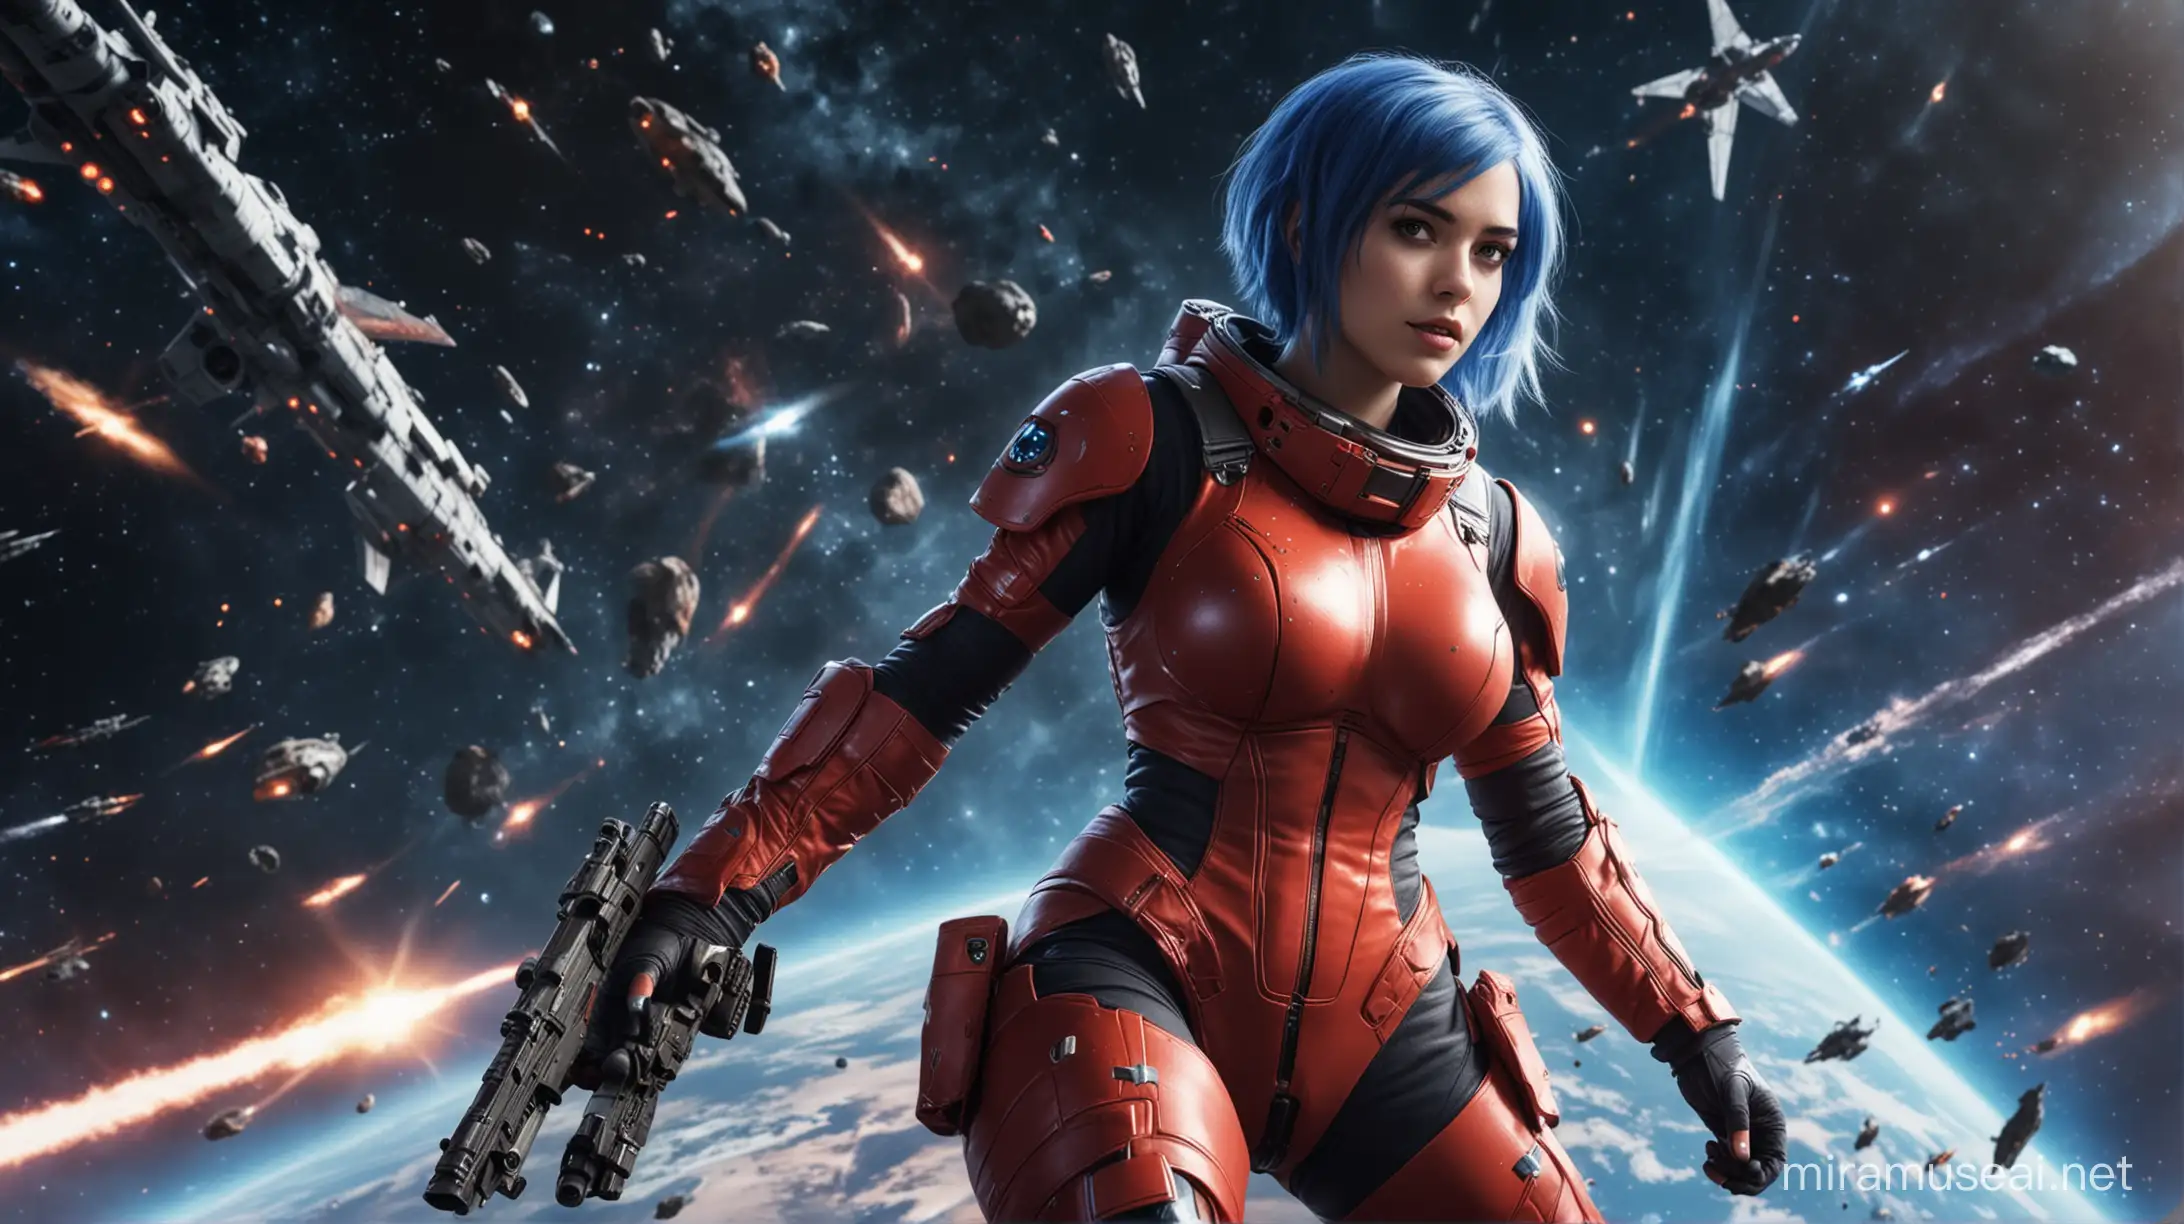 BlueHaired Girl in FormFitting Red Spacesuit Holding Weapons Amidst Galactic Combat